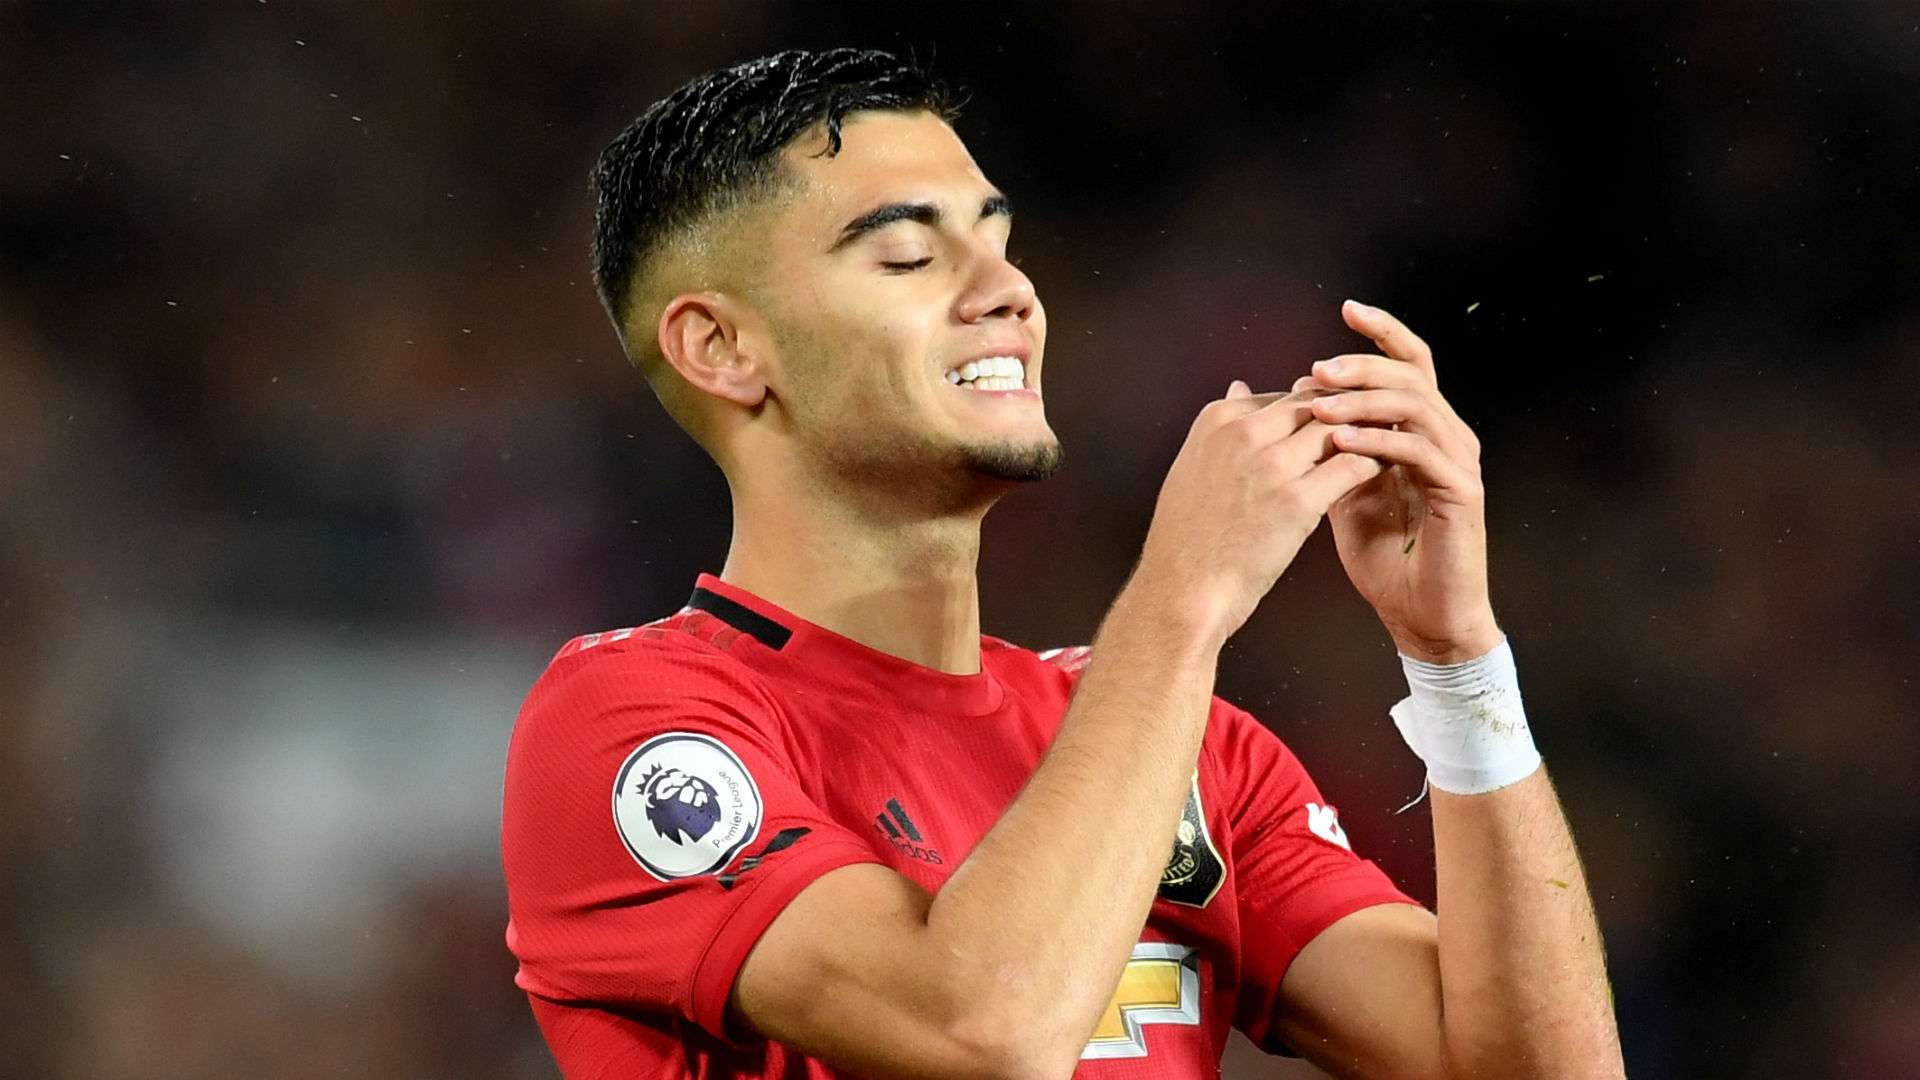 up to five players could leave man utd in summer - Bóng Đá